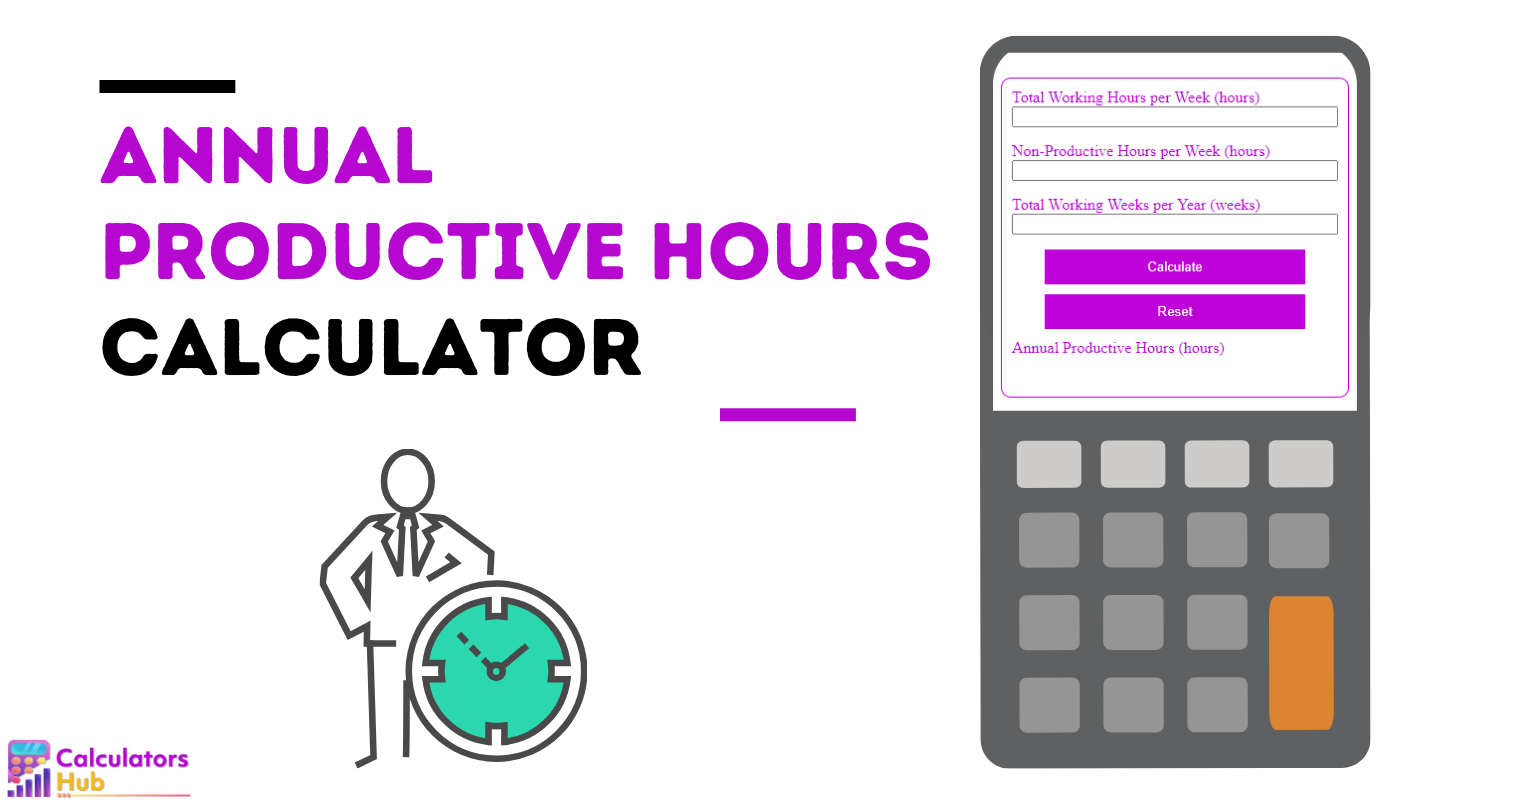 Annual Productive Hours Calculator